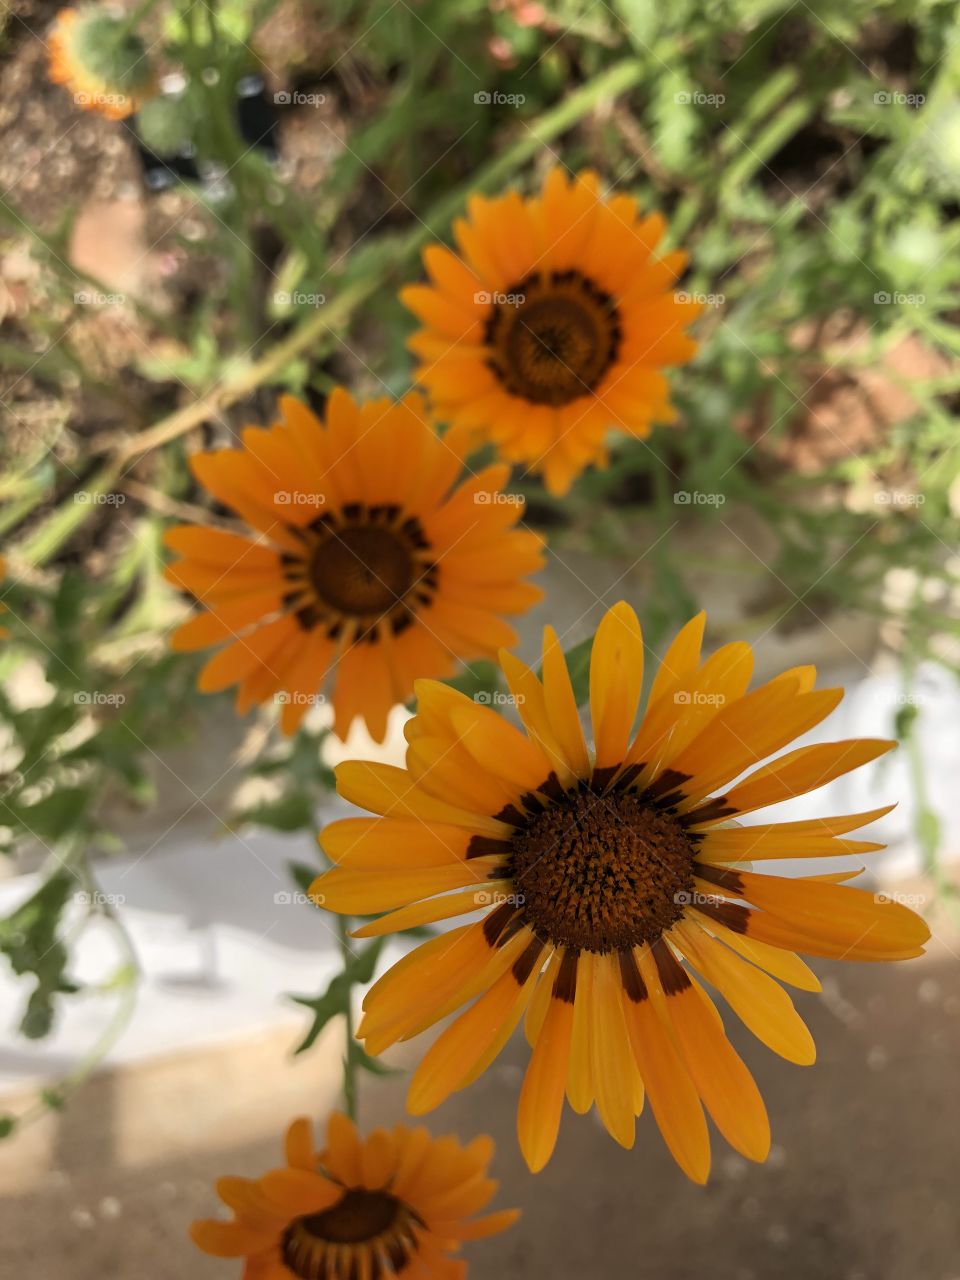 These beauties look like very striking sunflowers, whatever variety they are, they pass the test for transparency and joy.